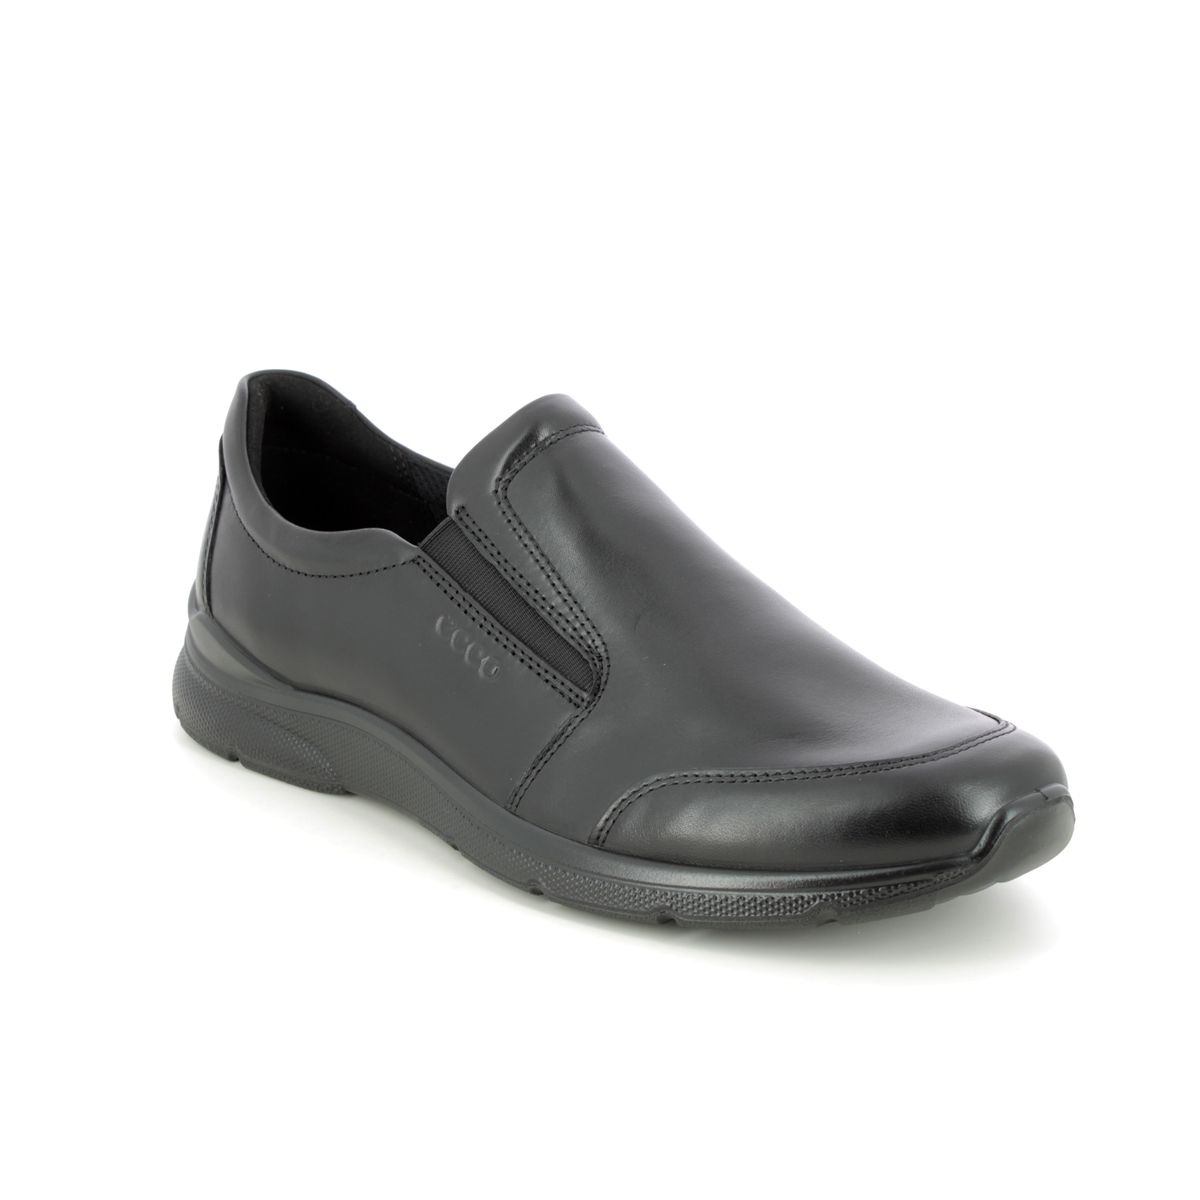 Ecco Irving Slip-On Black Leather Mens Slip-On Shoes 511684-11001 In Size 42 In Plain Black Leather